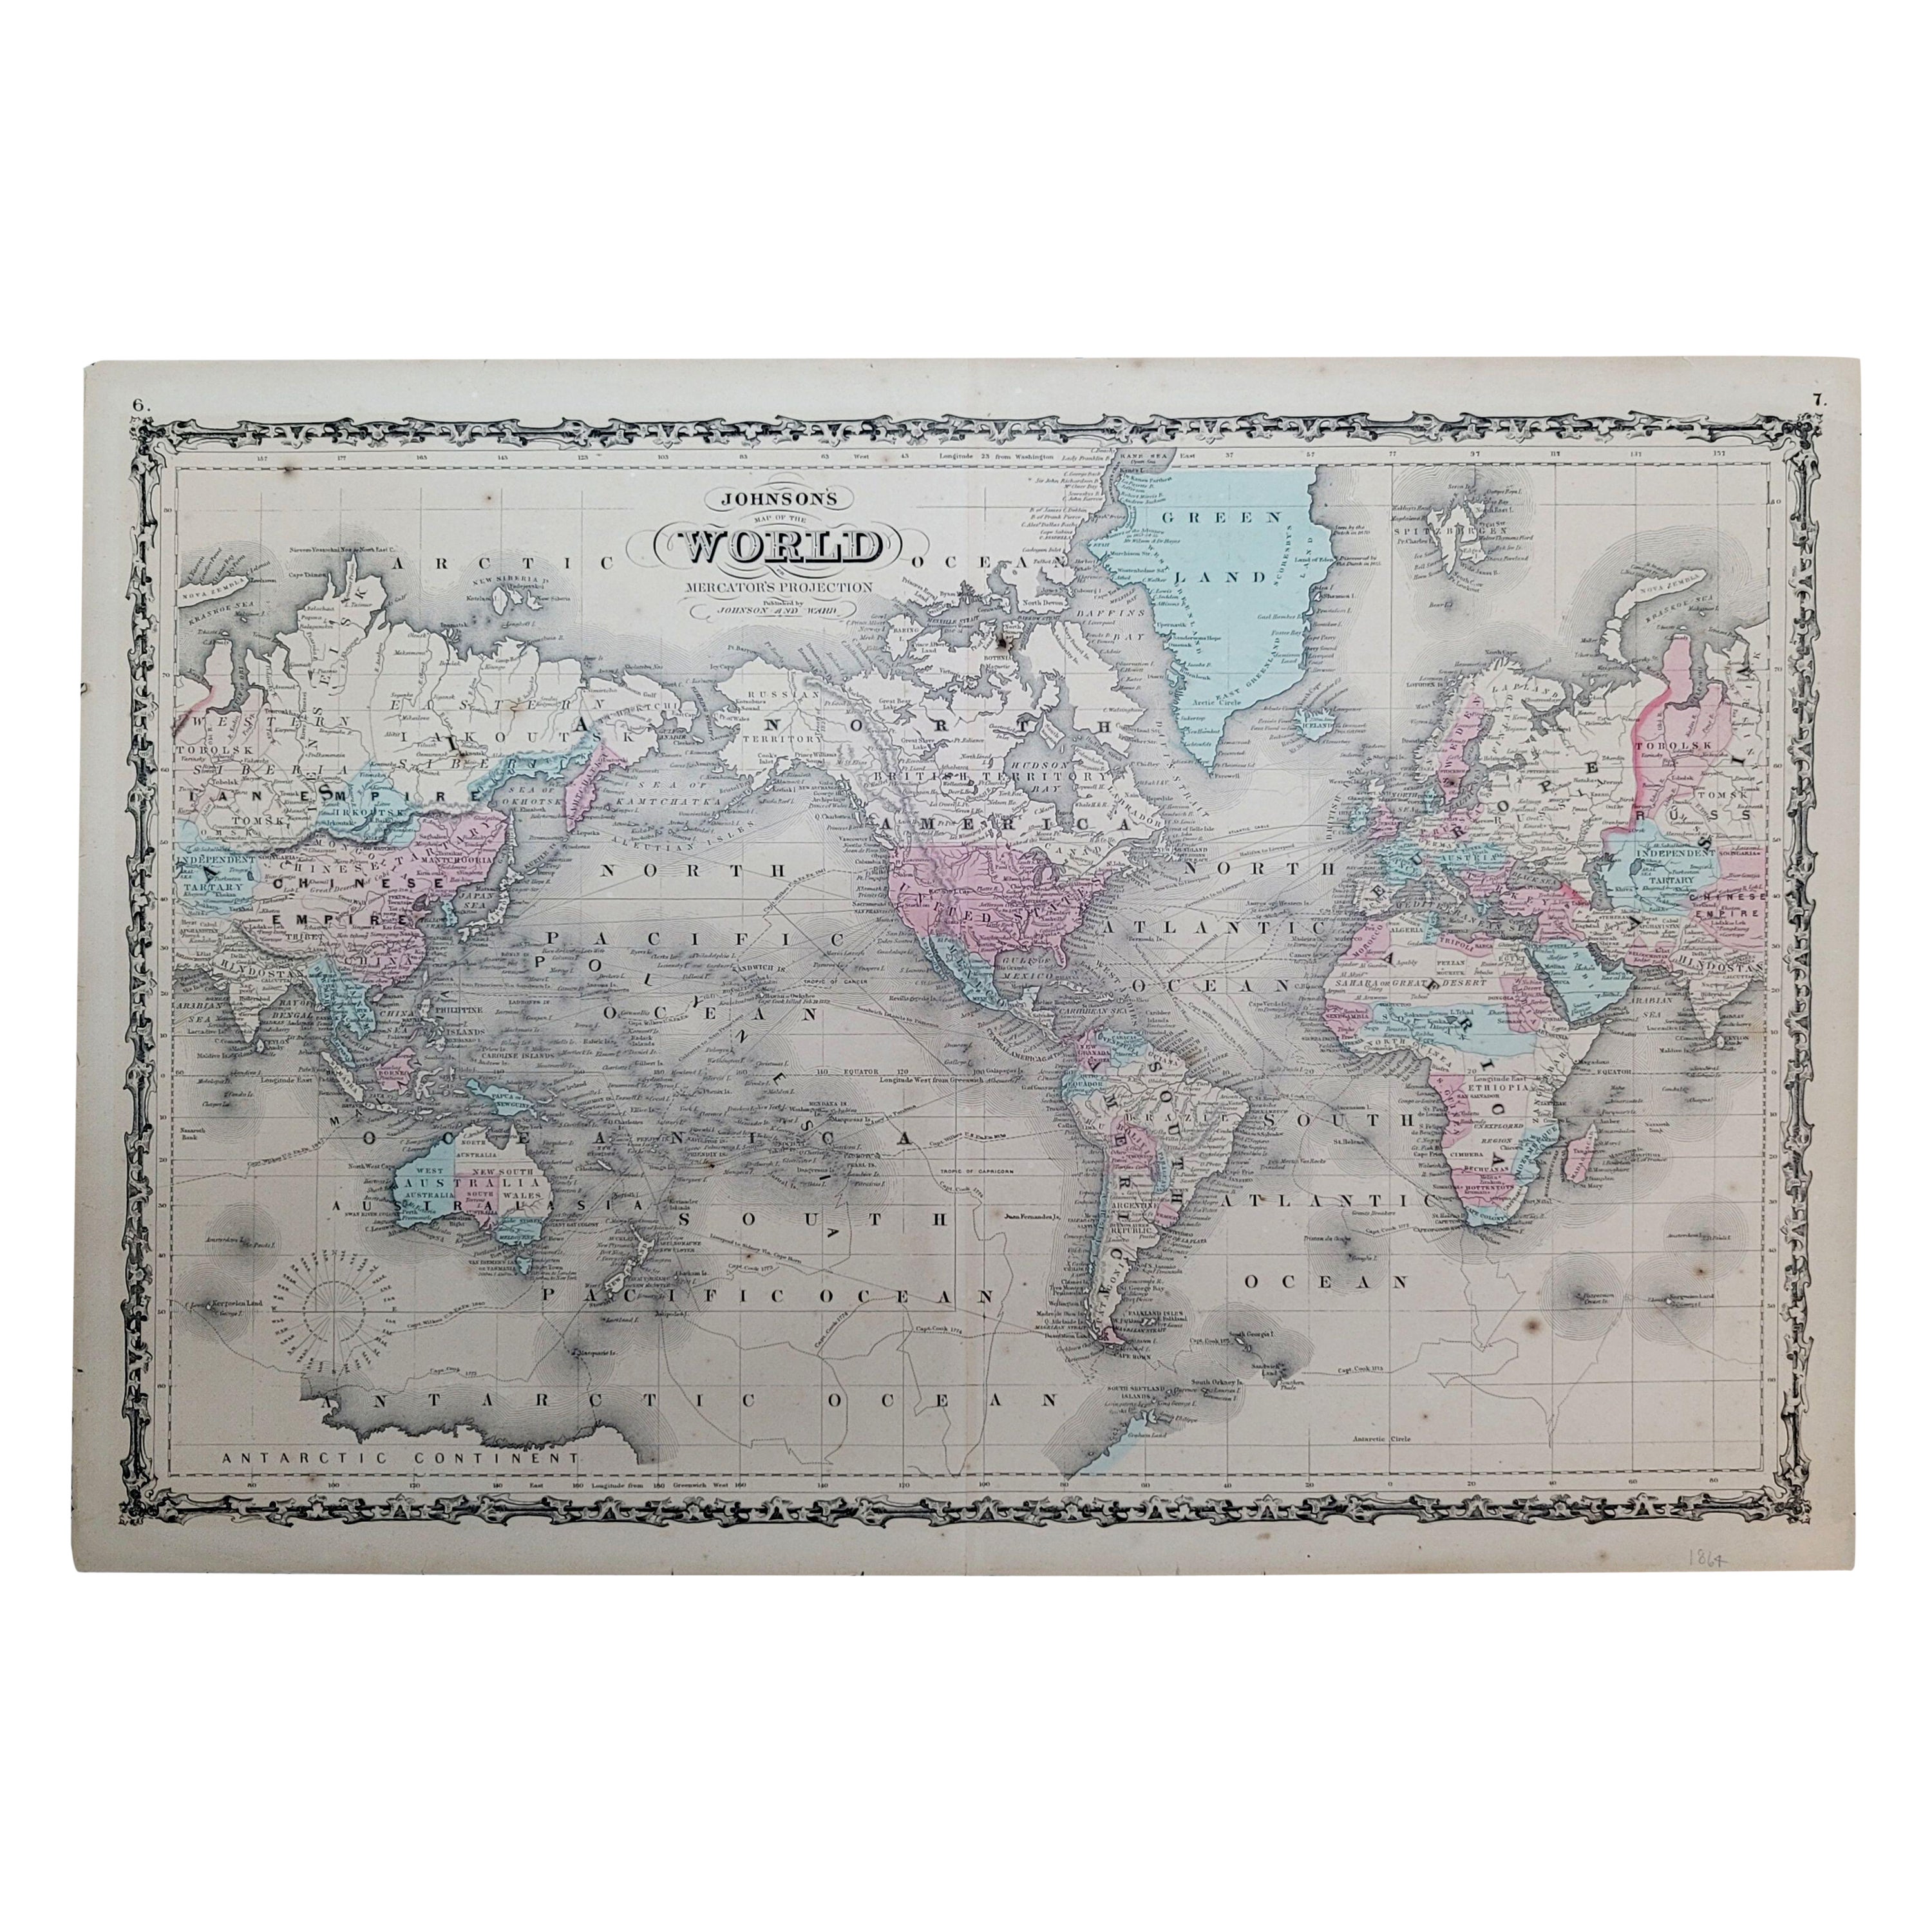 1864 Johnson's Map of the World on Mercator's Projection, Ric.B009 For Sale